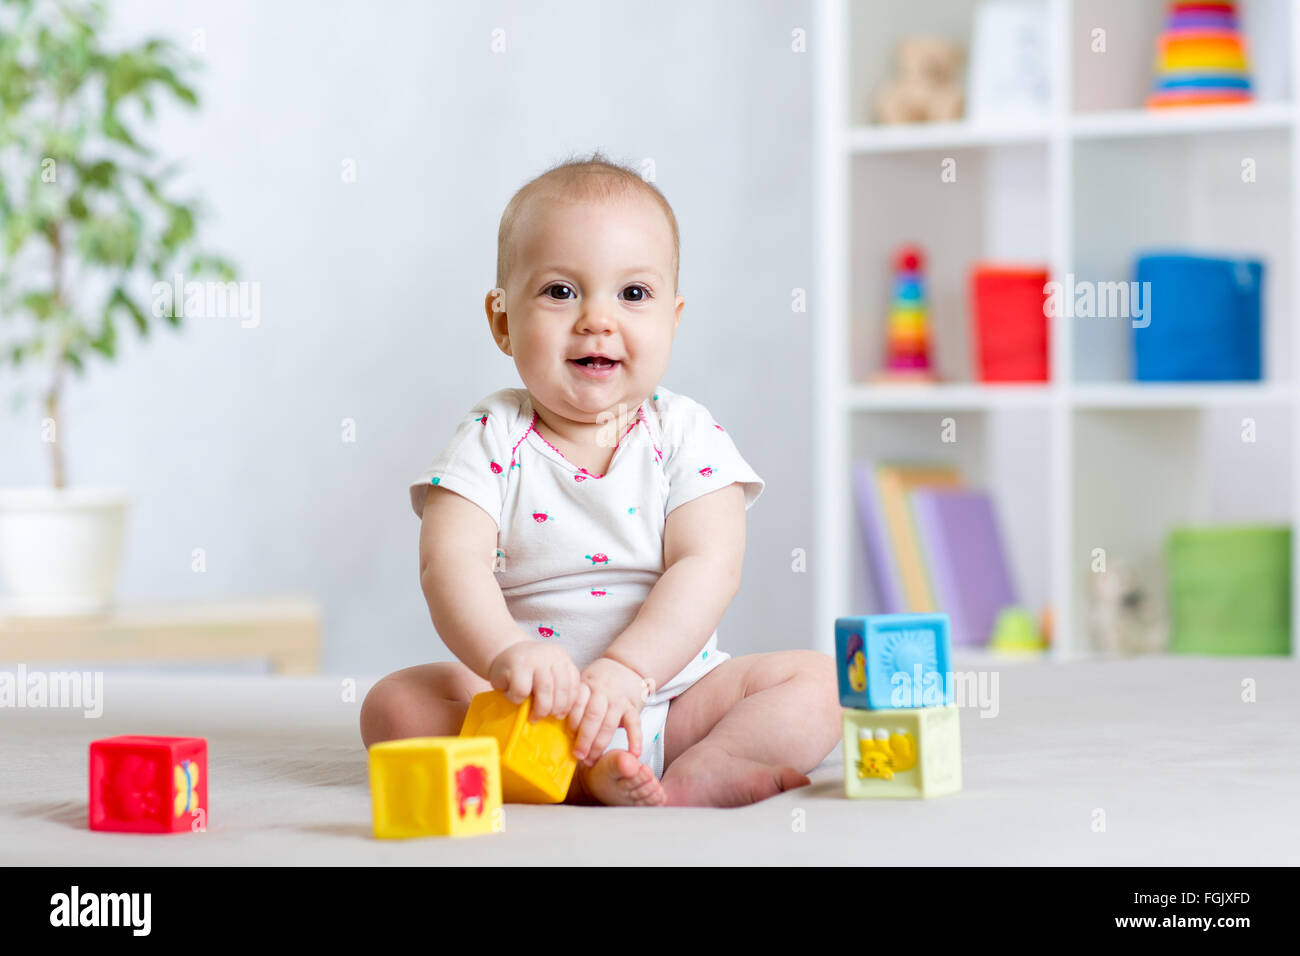 baby playing with building block toys Stock Photo